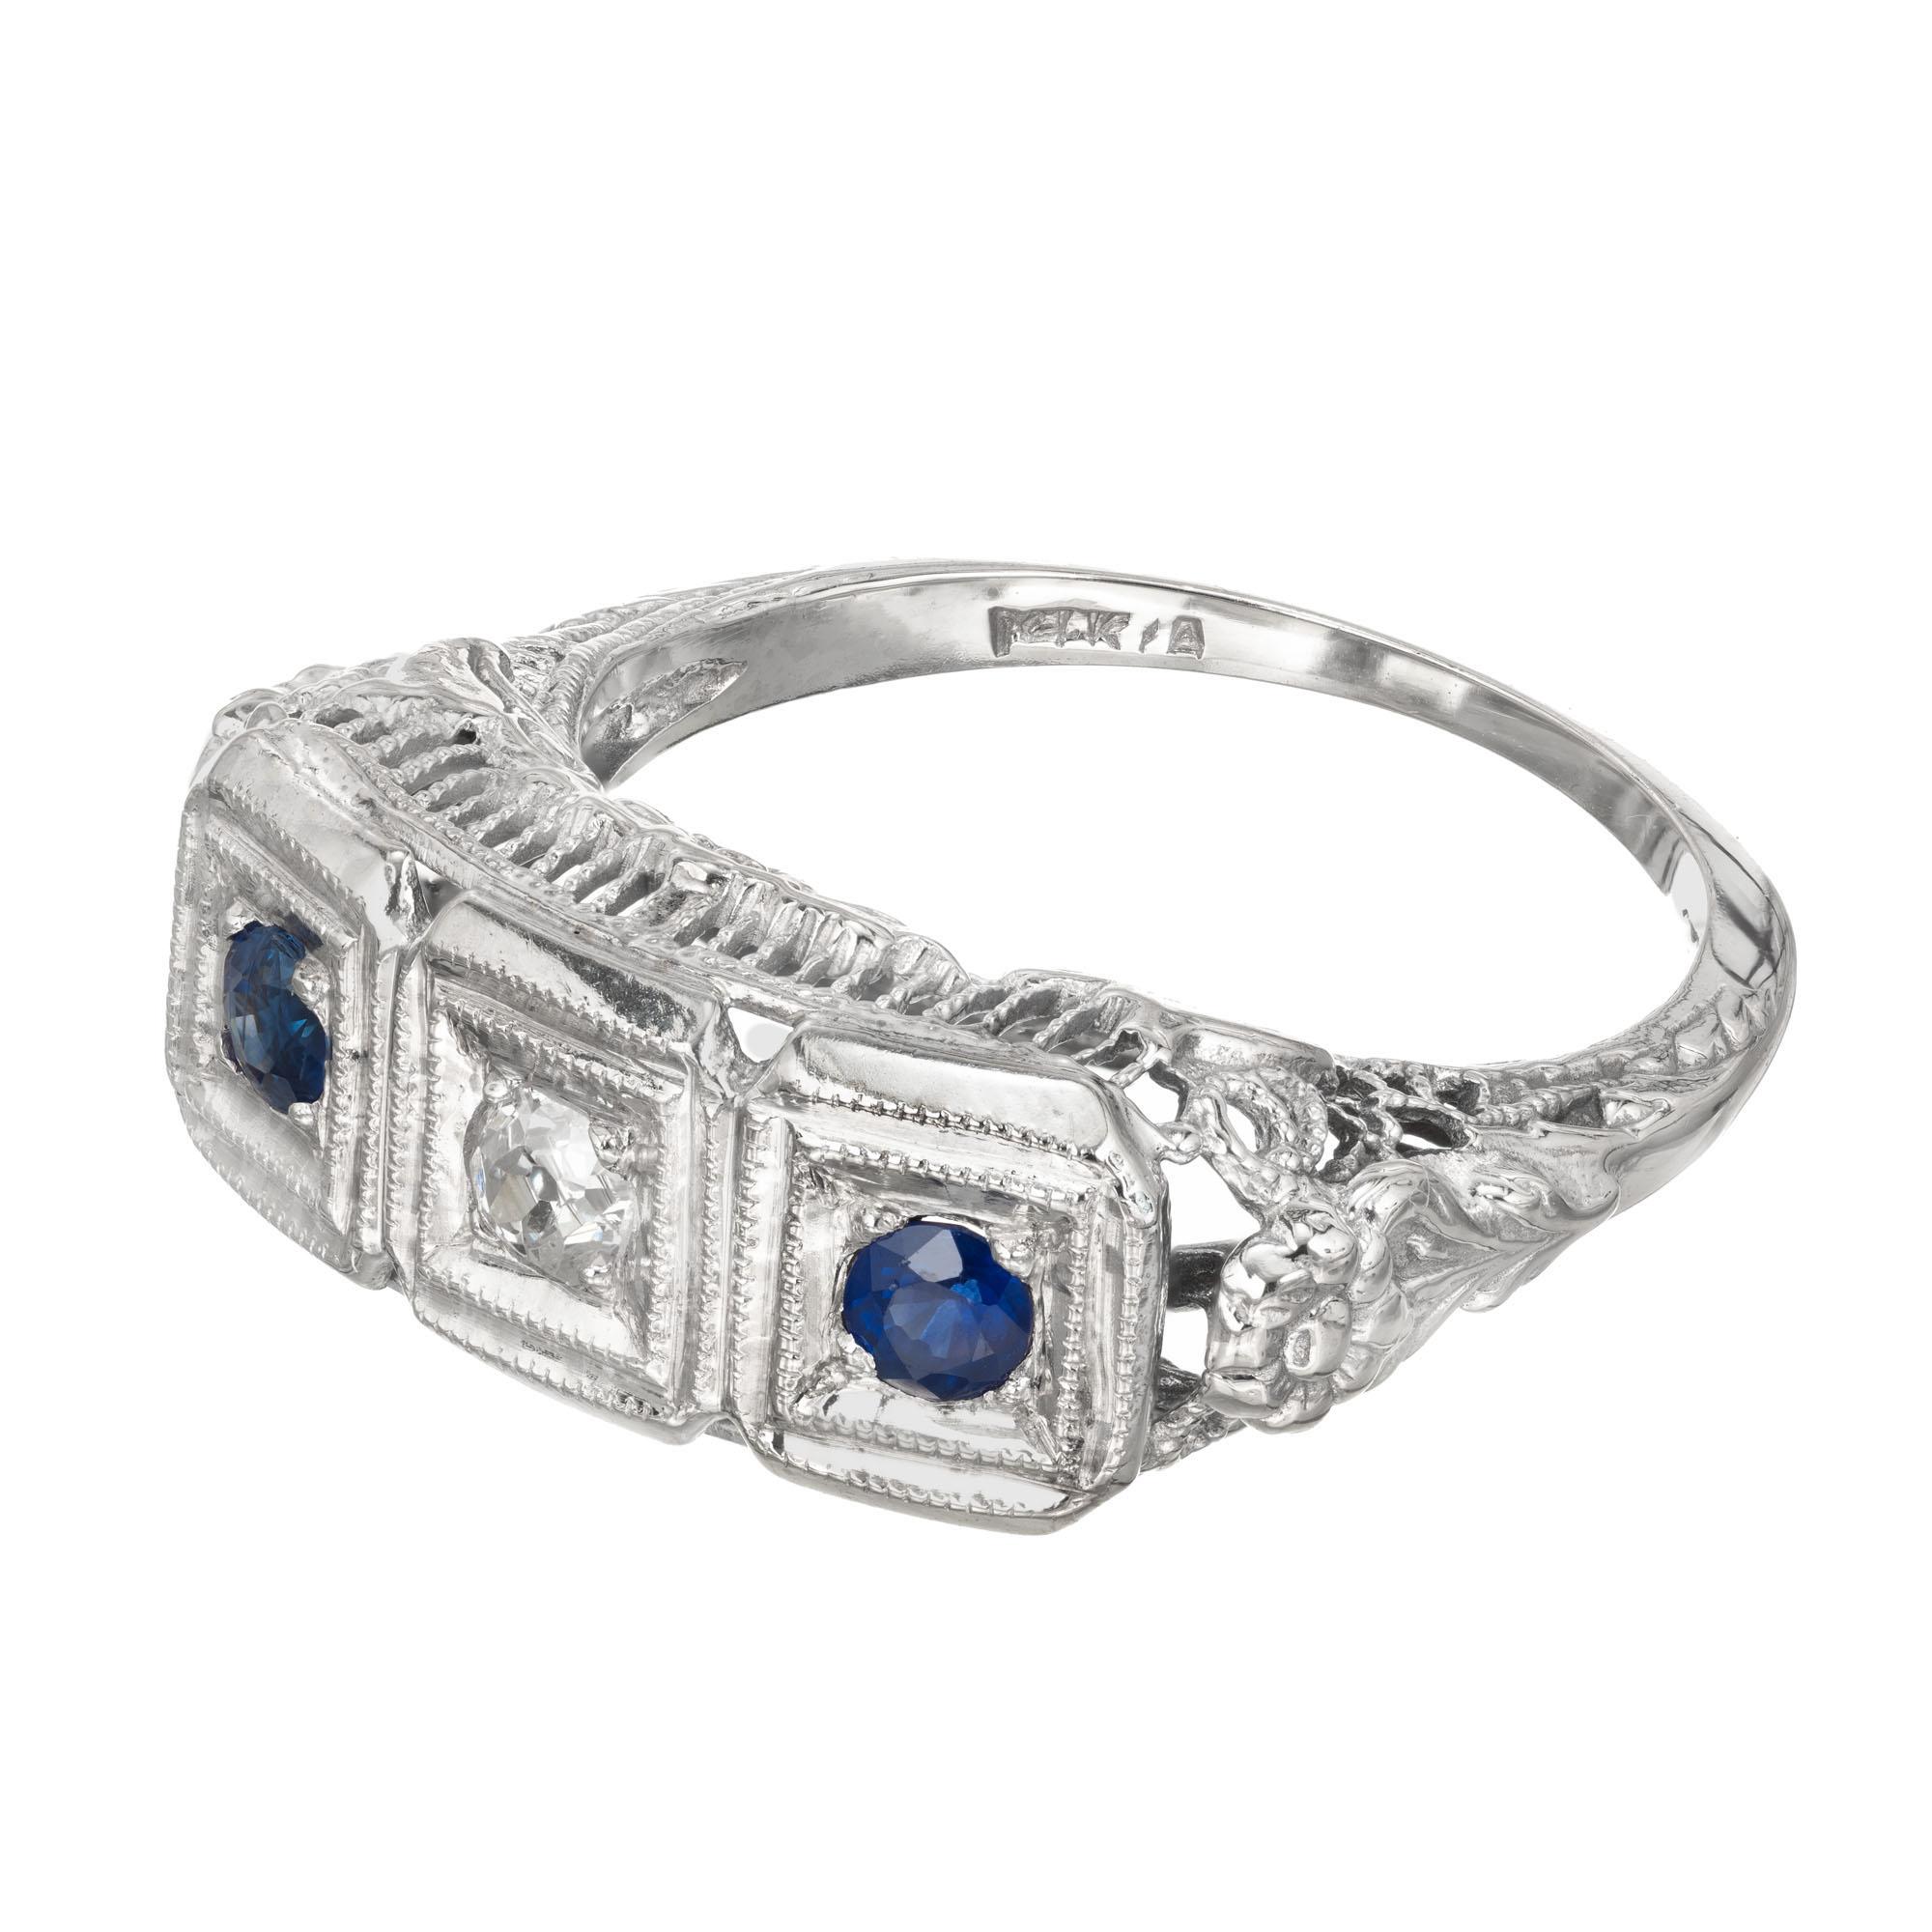 Diamond and sapphire three-stone ring. Filigree sides and shoulders, 14k white gold setting with a flat top set with two Sapphires and one old European cut diamond center. Late Art Deco circa 1940's

1 European cut diamond, approx. total weight